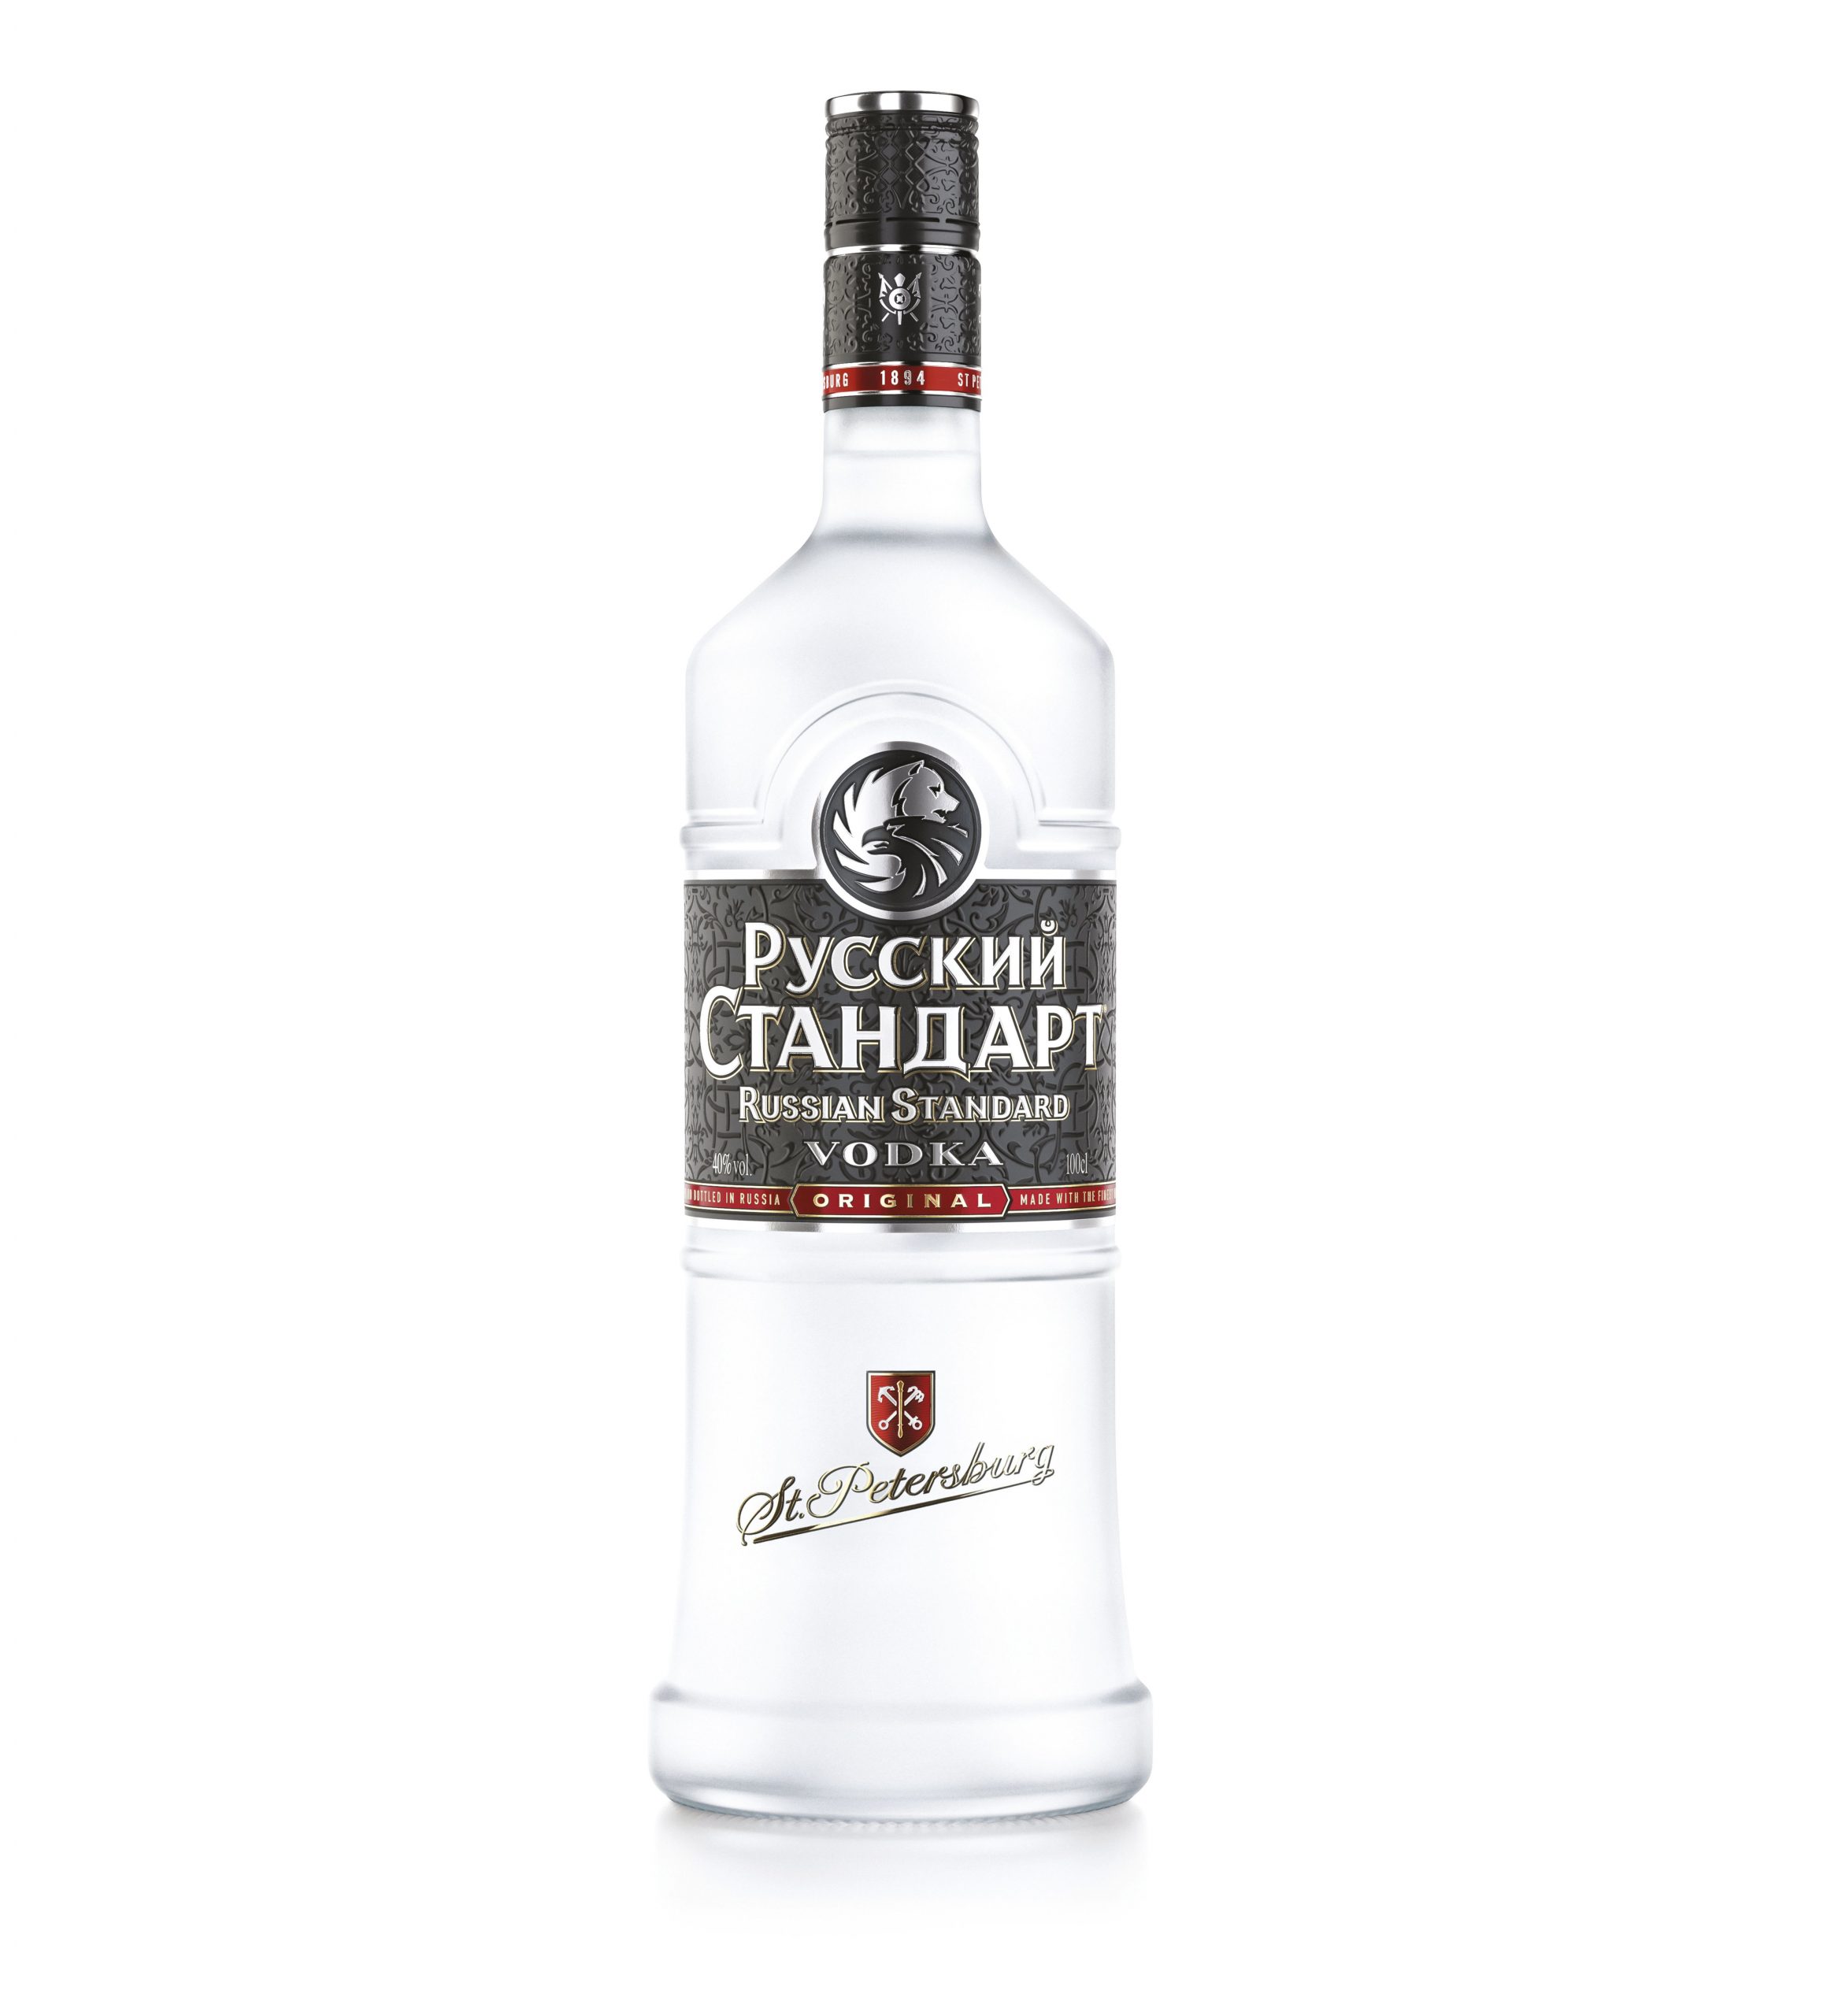 Russian Standard Vodka 2nd largest in global travel retail